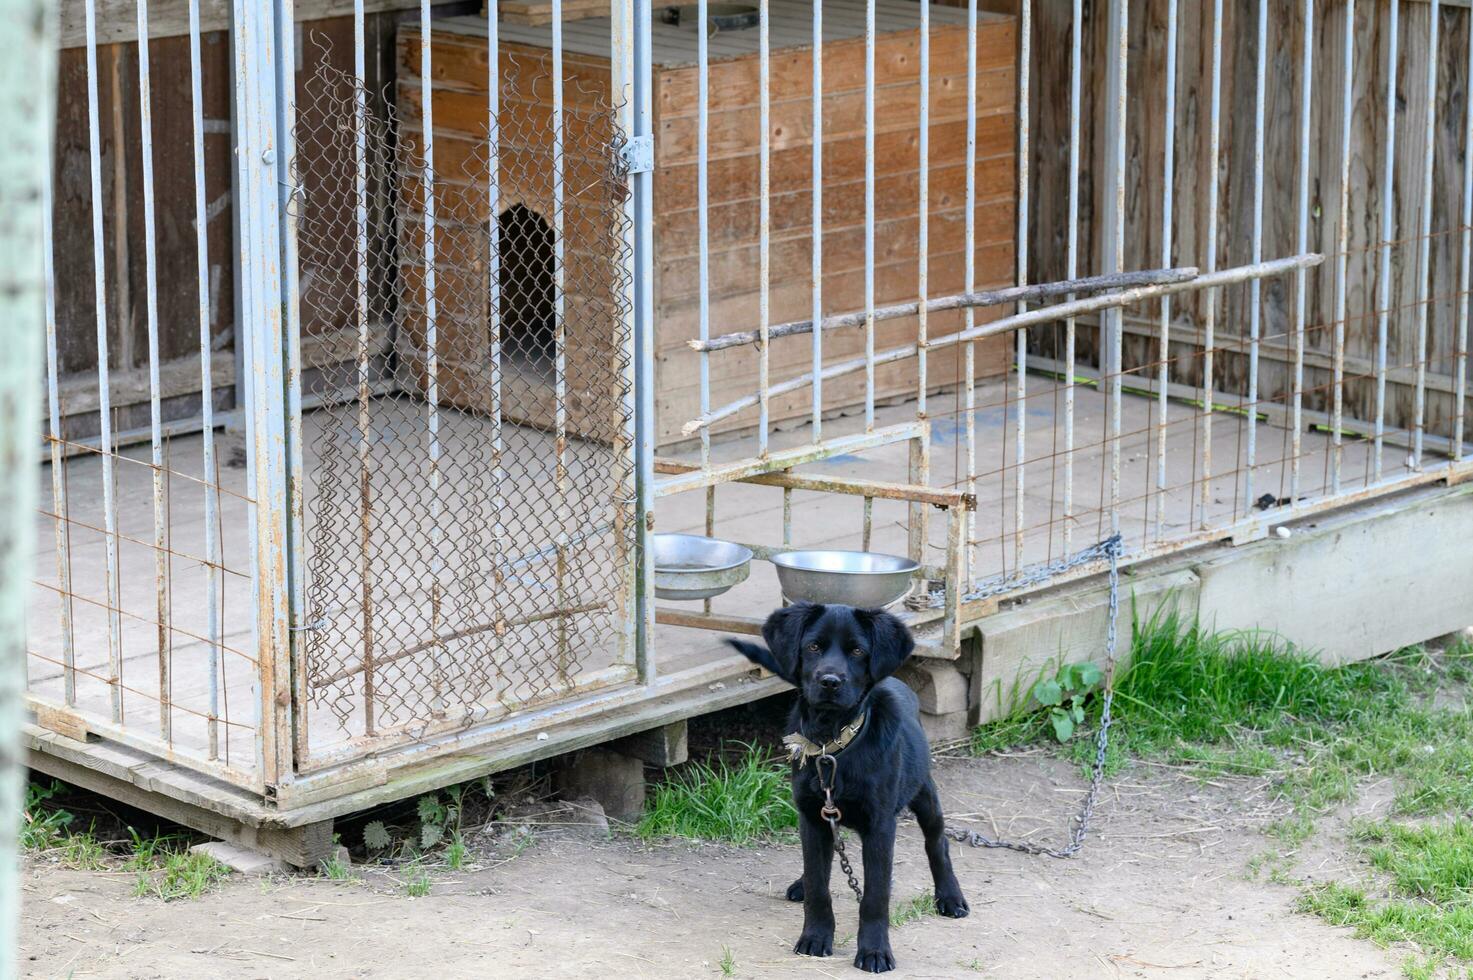 A small black dog on a chain stands near the enclosure photo